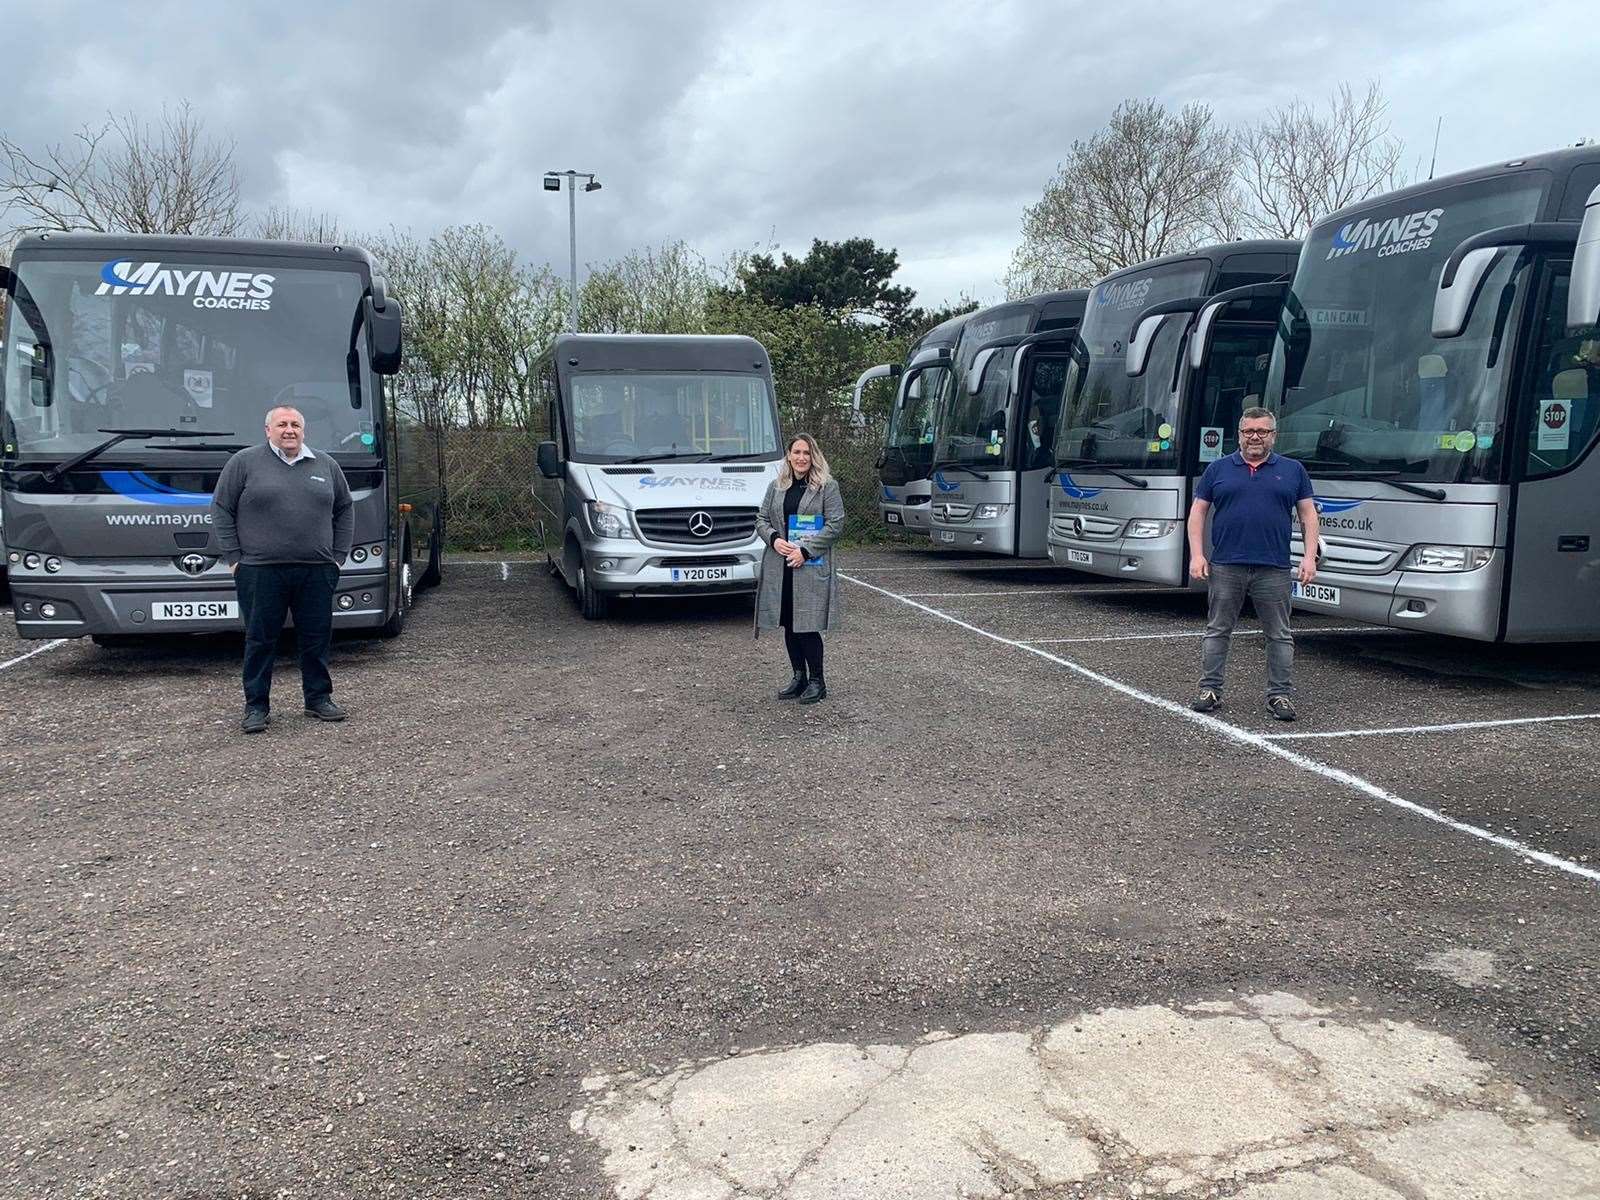 ELECTION 2021: Moray coach firm praised for community support during Covid